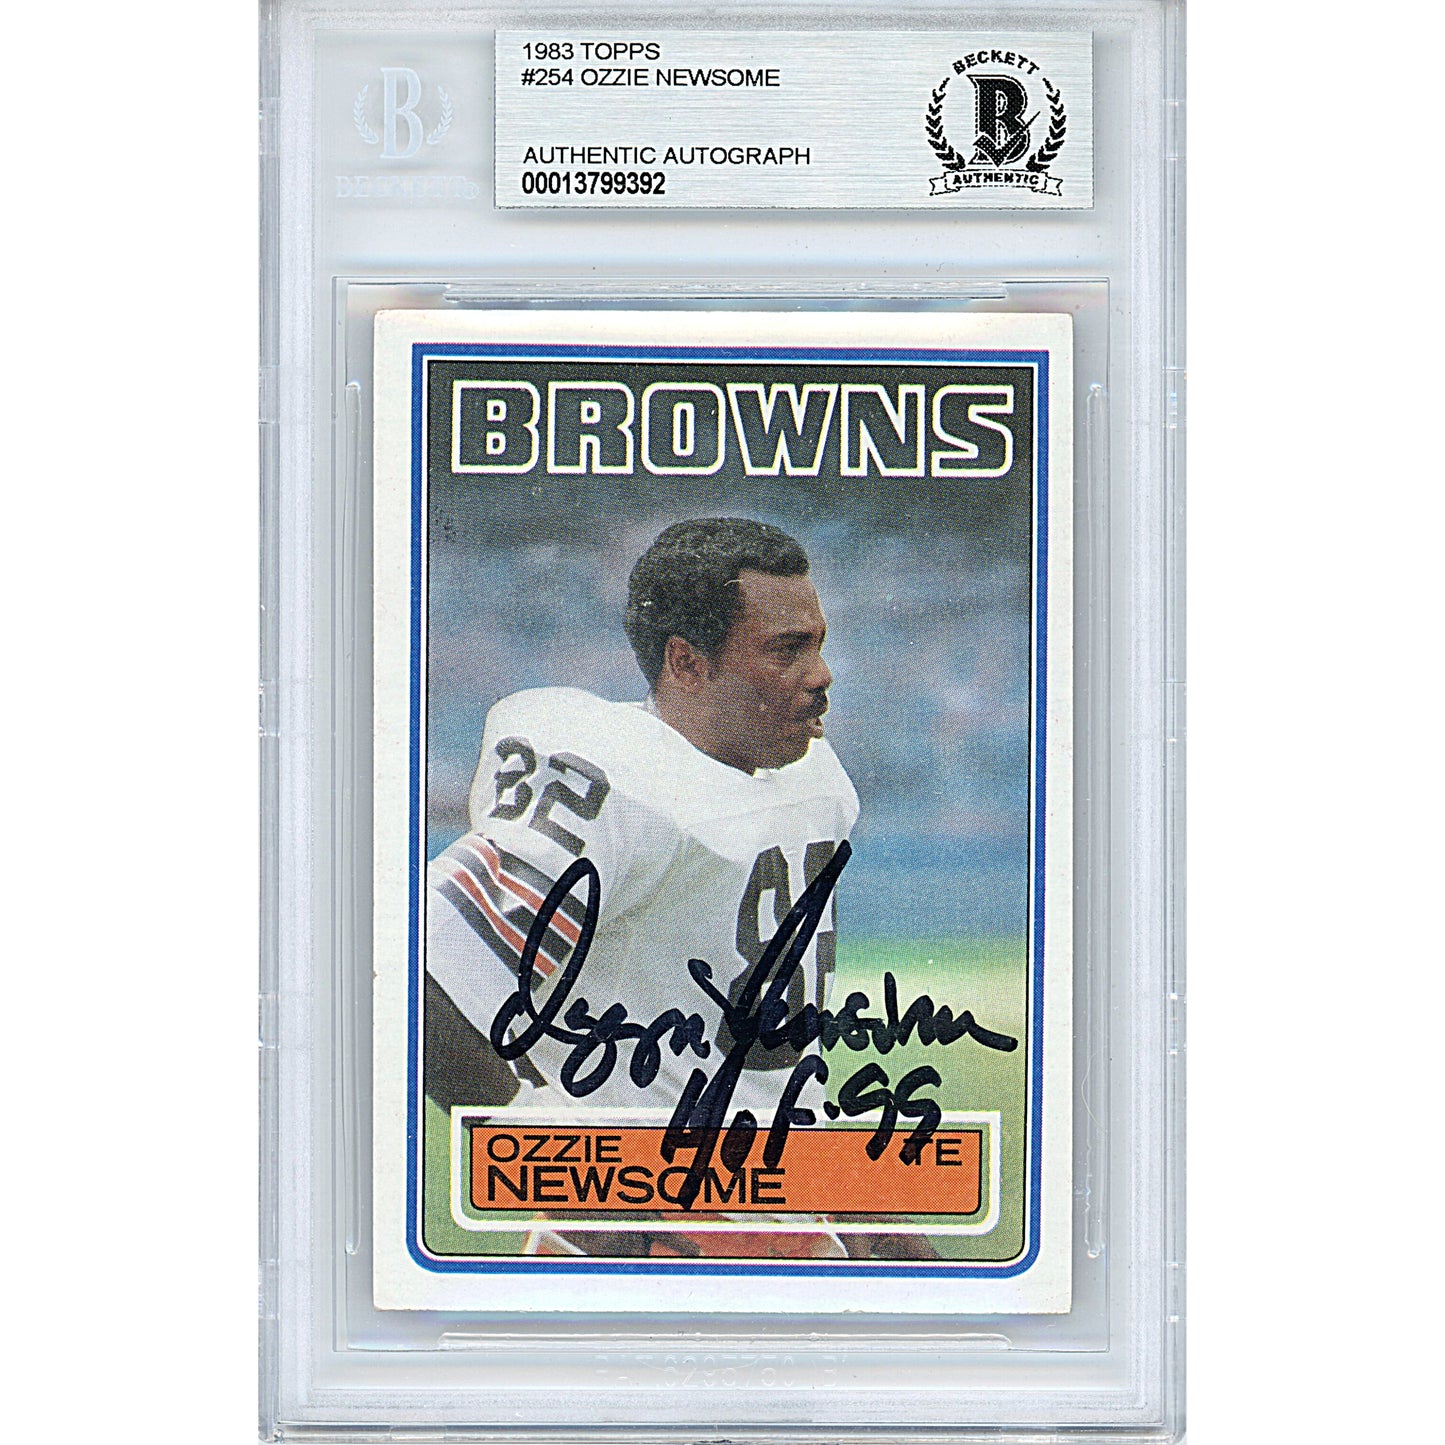 Footballs- Autographed- Ozzie Newsome Signed Cleveland Browns 1983 Topps Football Card Beckett Slabbed 00013799392 - 101